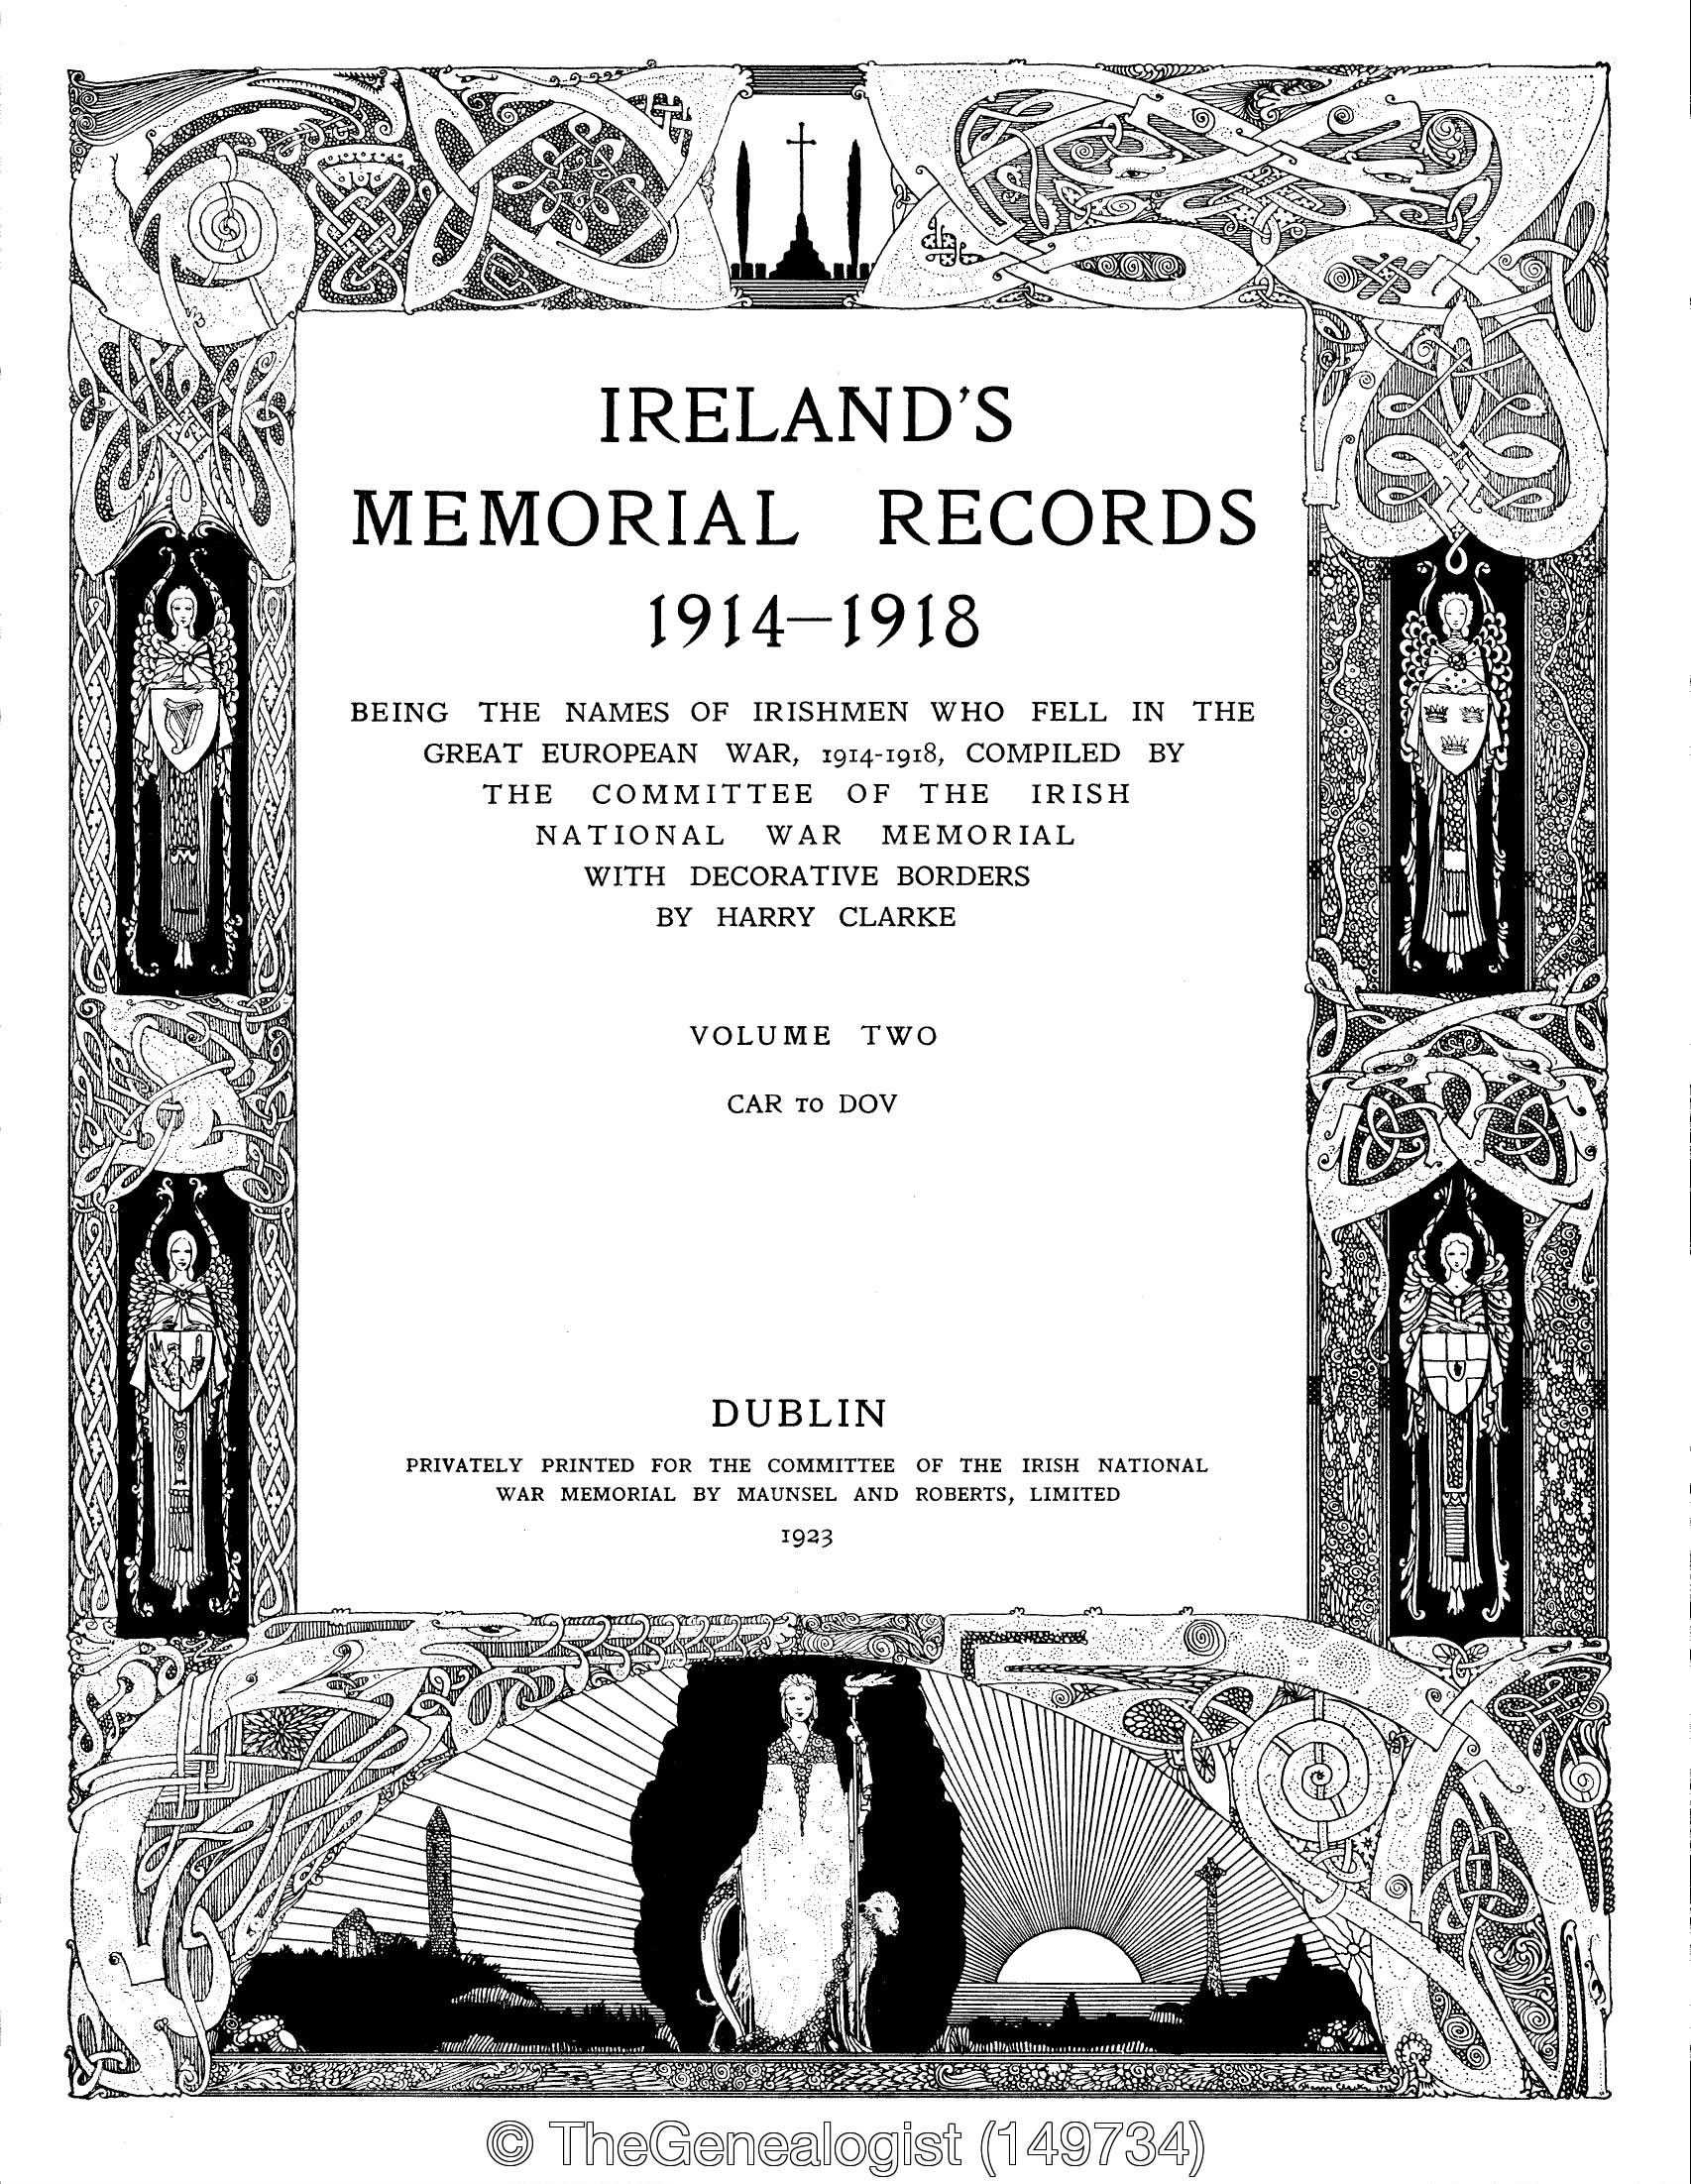 Frontispiece of Ireland's Memorial Records 1914-1918 from Military records on TheGenealogist